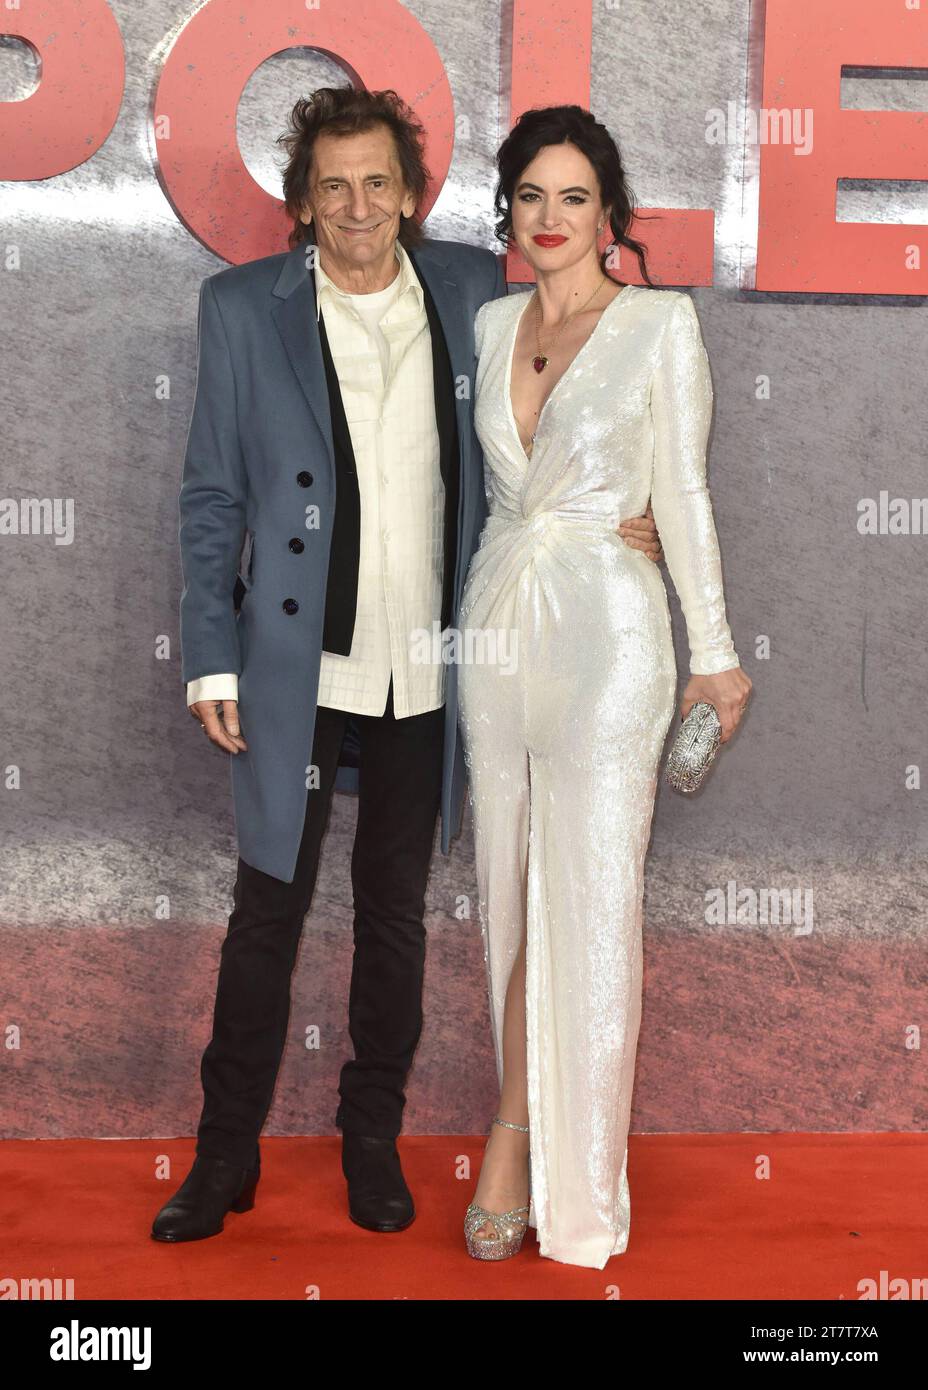 Ronnie Wood and Sally Wood attends Napoleon - UK Premiere, at the Odeon Luxe Leicester Square in London, England. UK. Thursday 16th November 2023 - BANG MEDIA INTERNATIONAL FAMOUS PICTURES 28 HOLMES ROAD LONDON NW5 3AB UNITED KINGDOM tel 44 0 02 7485 1005 email: picturesfamous.uk.com Copyright: xJamesxWarrenx FP Napoleon UK Prem 069 Credit: Imago/Alamy Live News Stock Photo